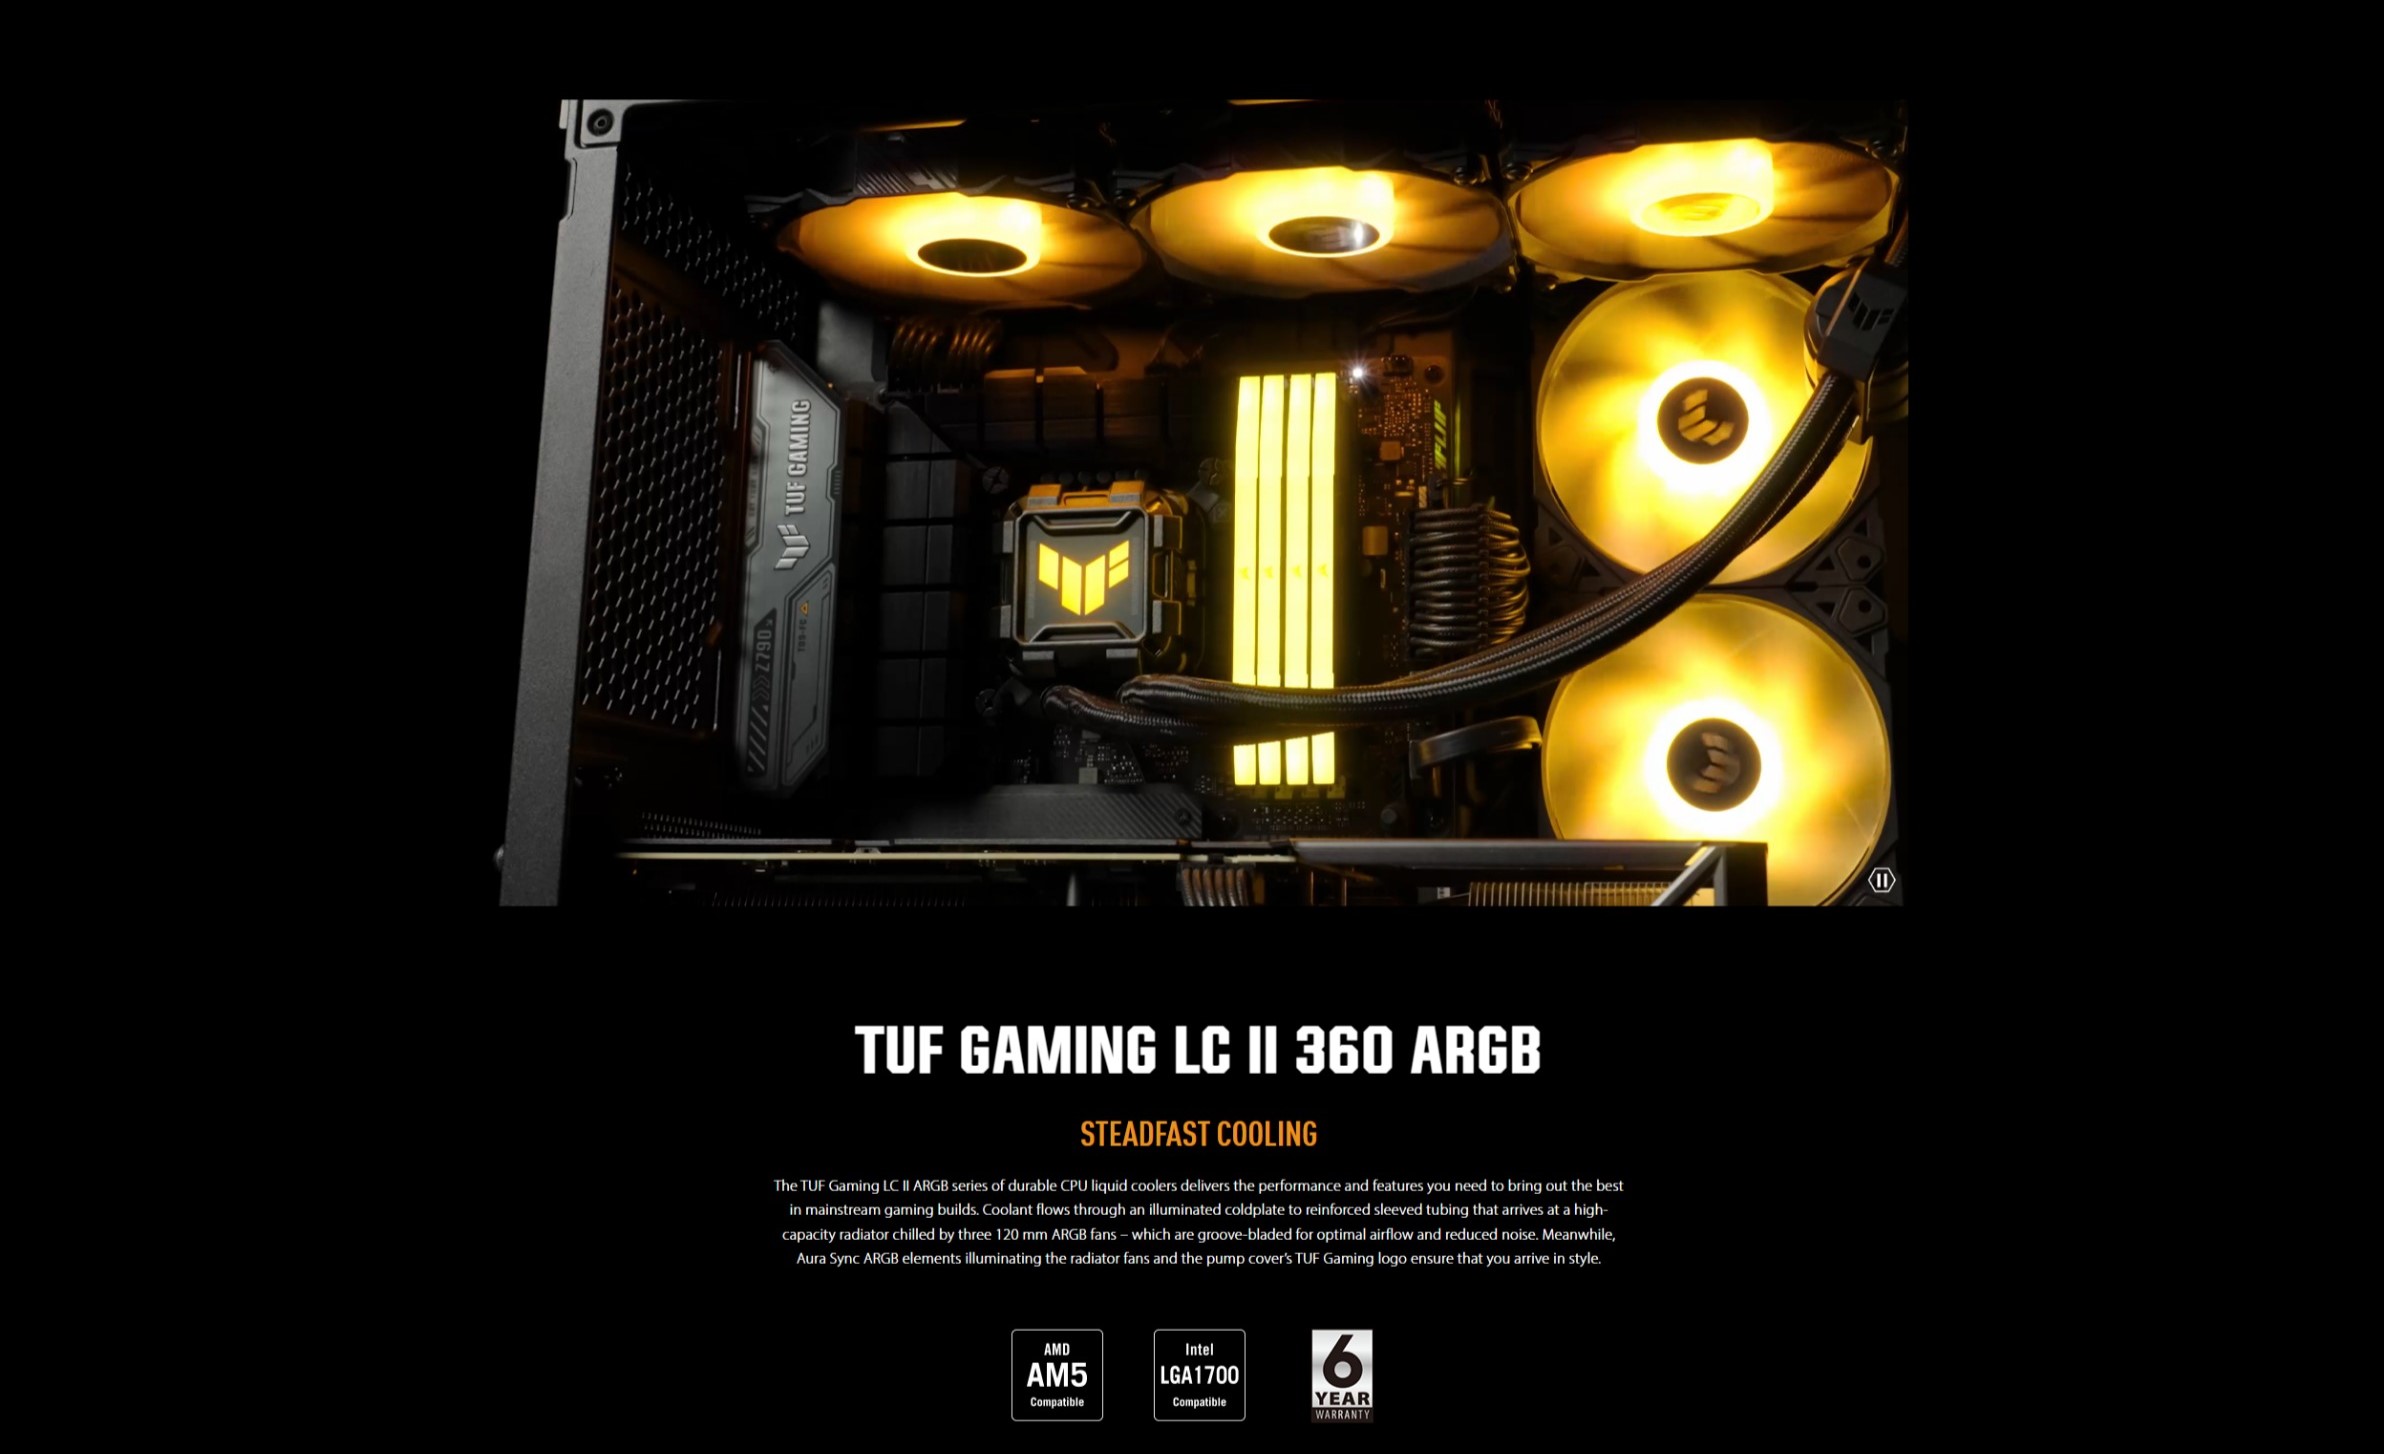 A large marketing image providing additional information about the product ASUS TUF Gaming LC II 360 ARGB 360mm AIO CPU Cooler - Additional alt info not provided